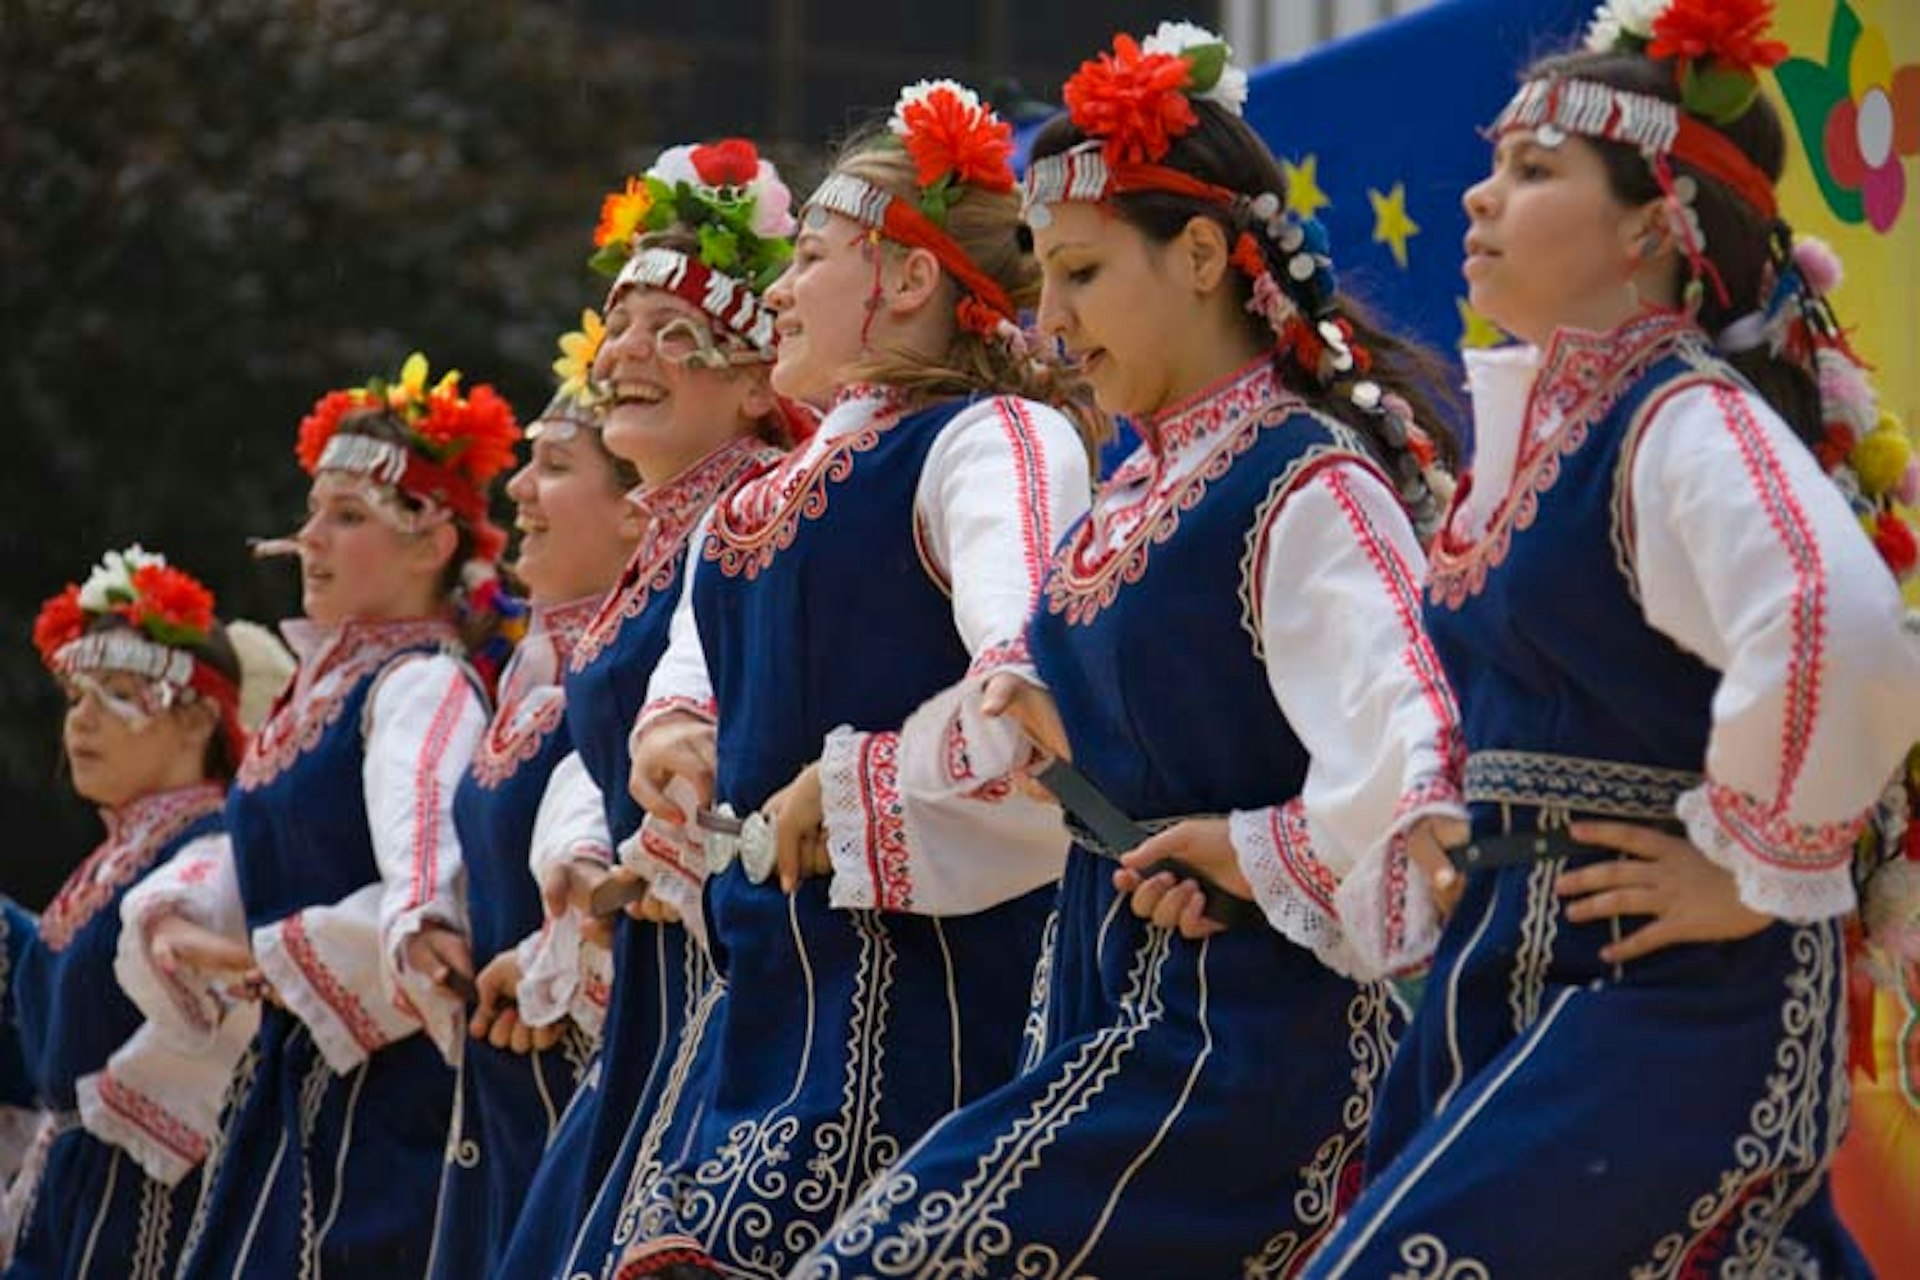 Traditional Bulgarian folk dancing is a riot of colour, costumes and fancy footwork. Image by Keren Su / Lonely Planet Images / Getty Images